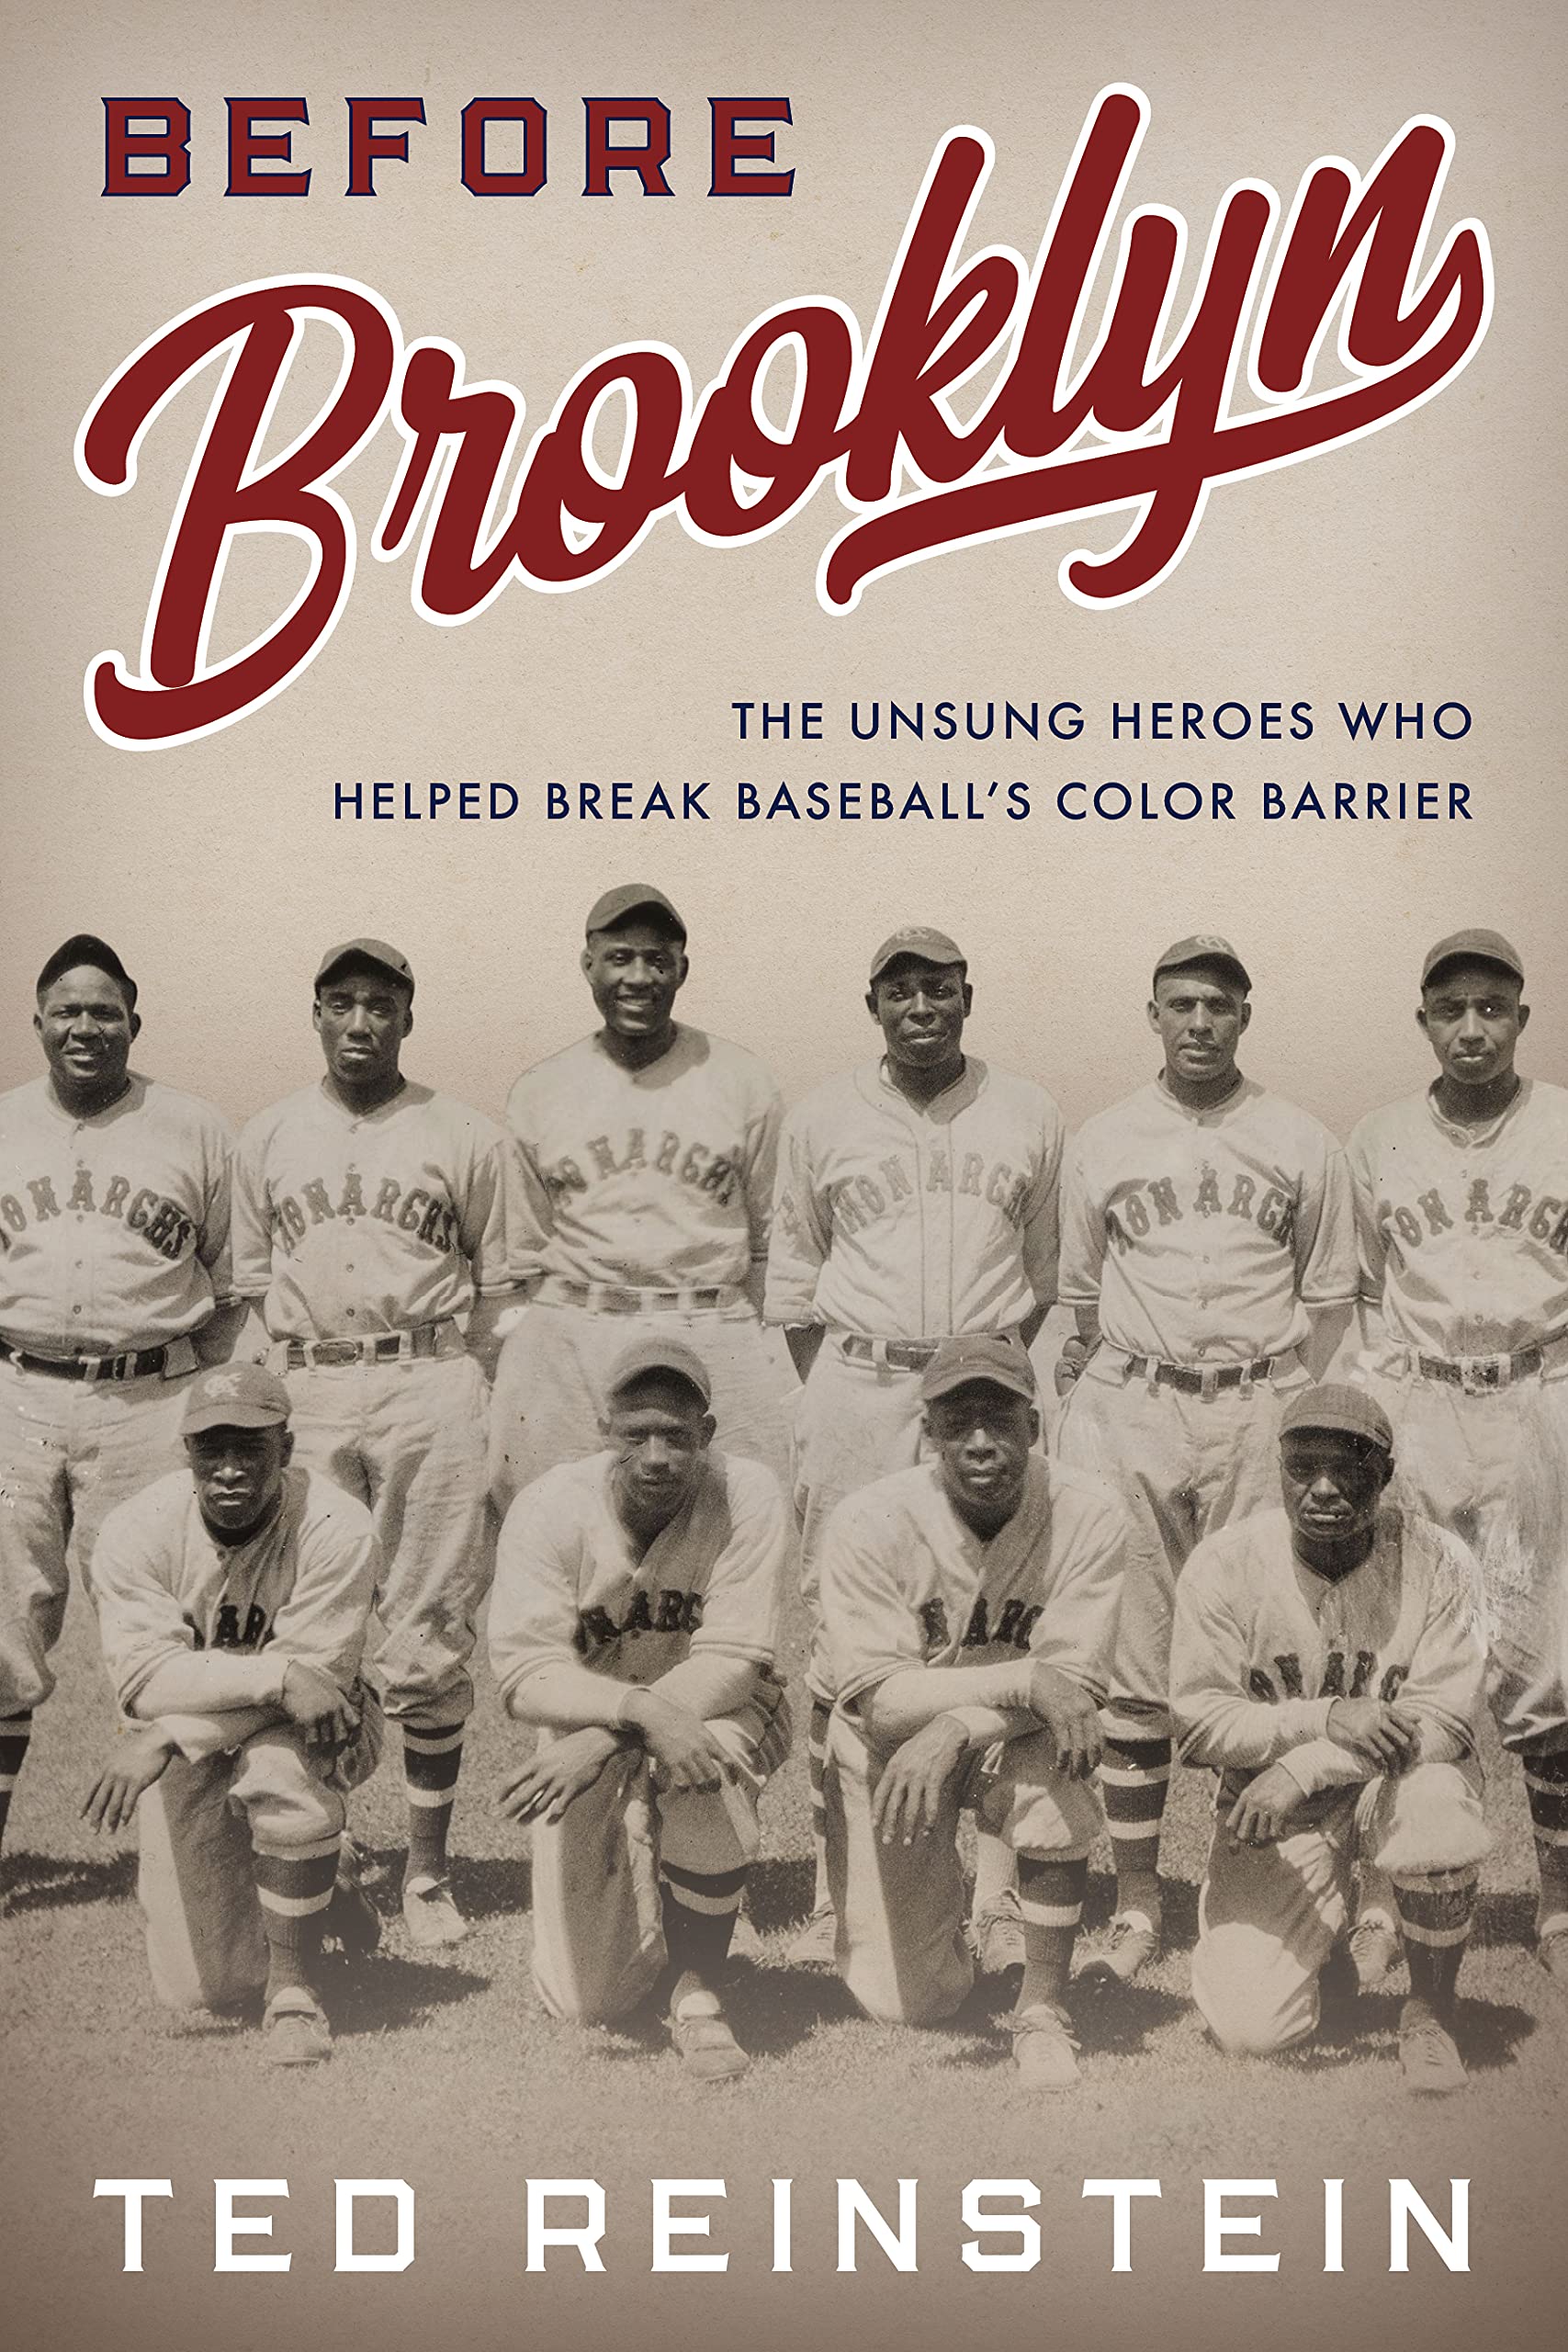 image of book cover, titled before brooklyn, with Black baseball players in old fashioned uniforms